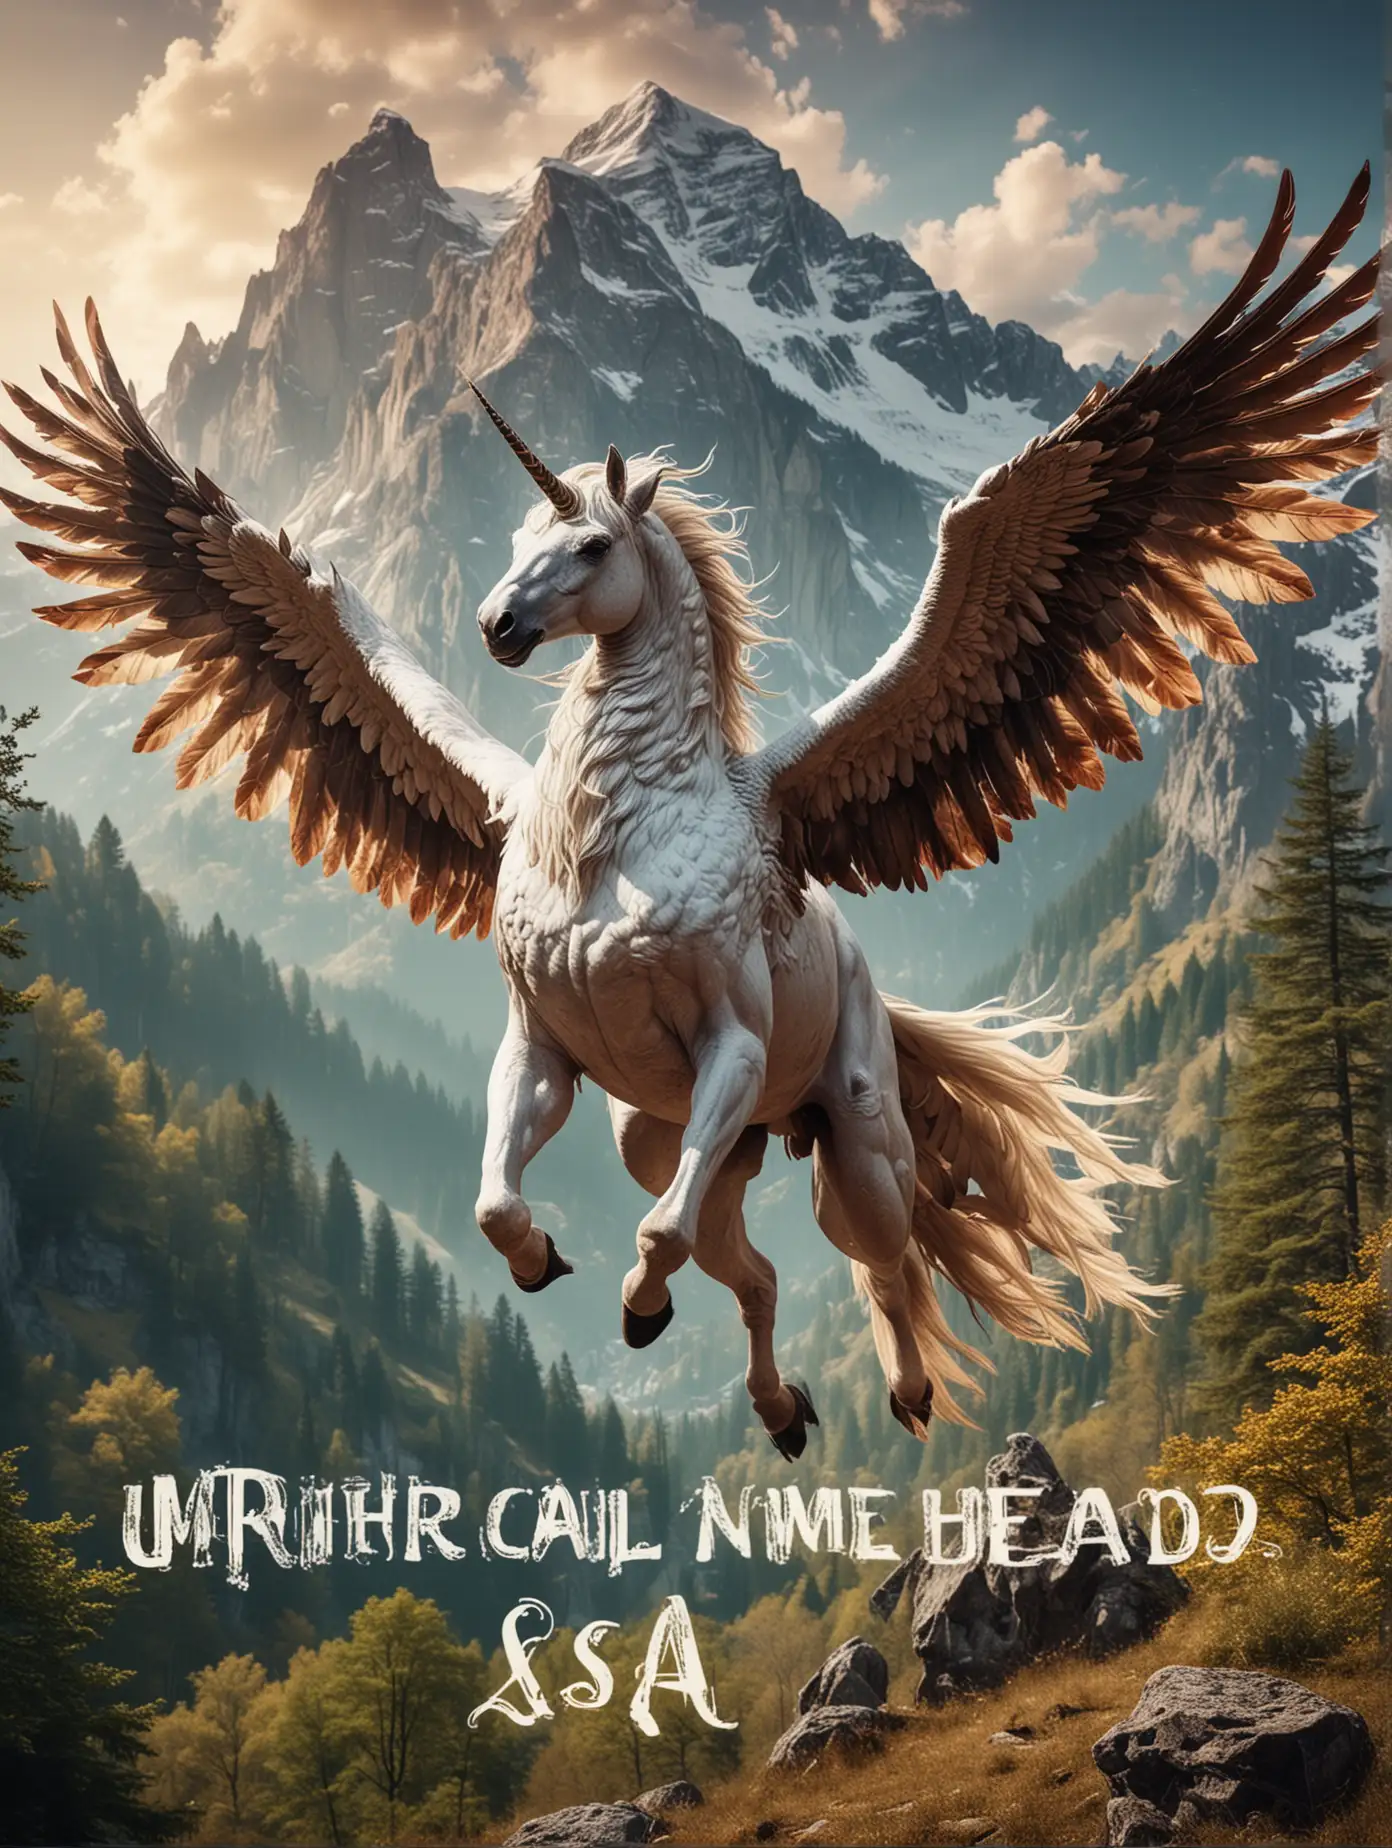 Majestic EagleHeaded Unicorn with Wings Soaring Over Mountainous Landscape